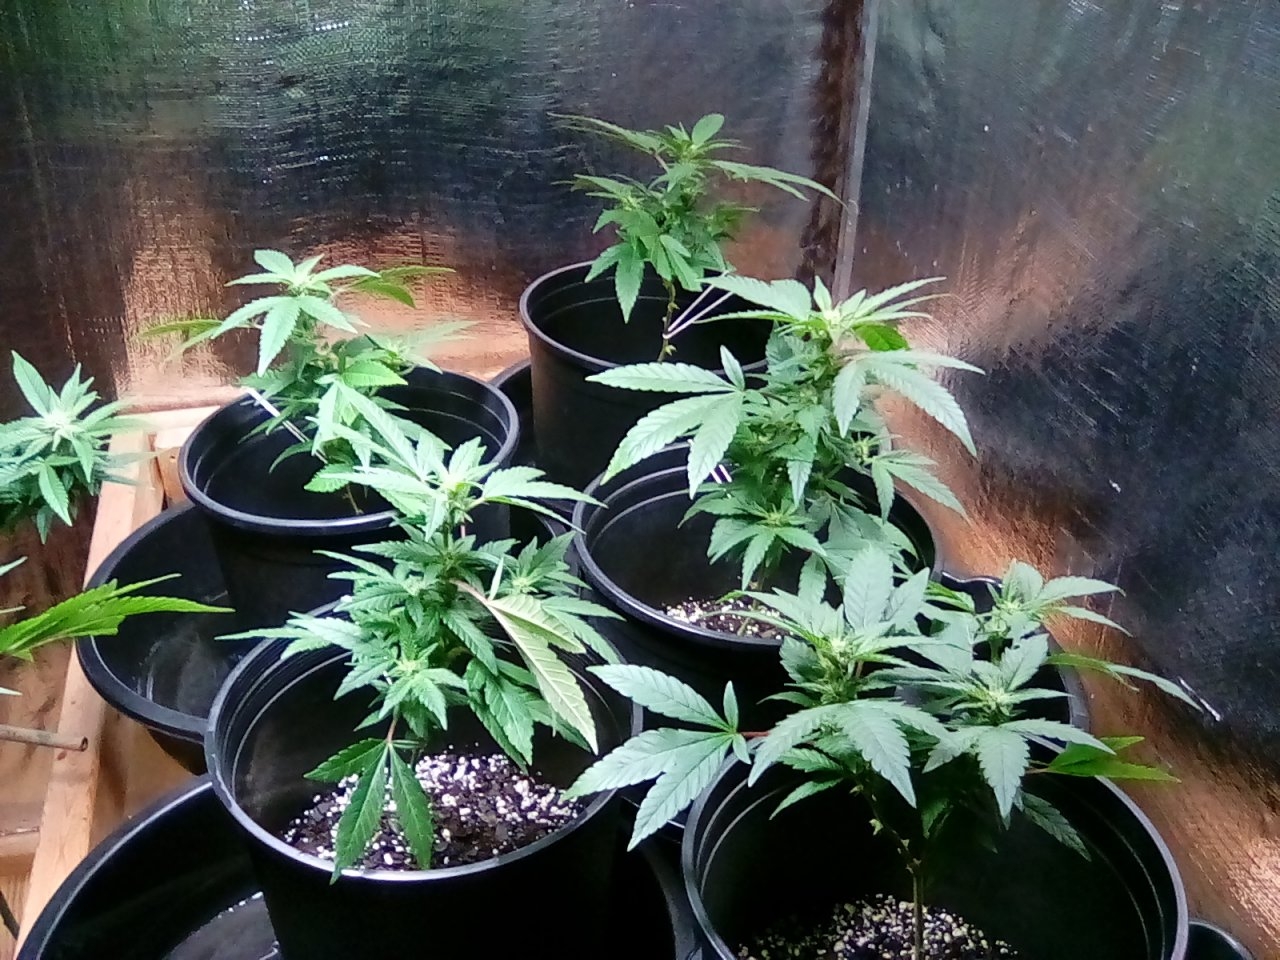 Clones at day 17 fast flip no vegging straight into flower